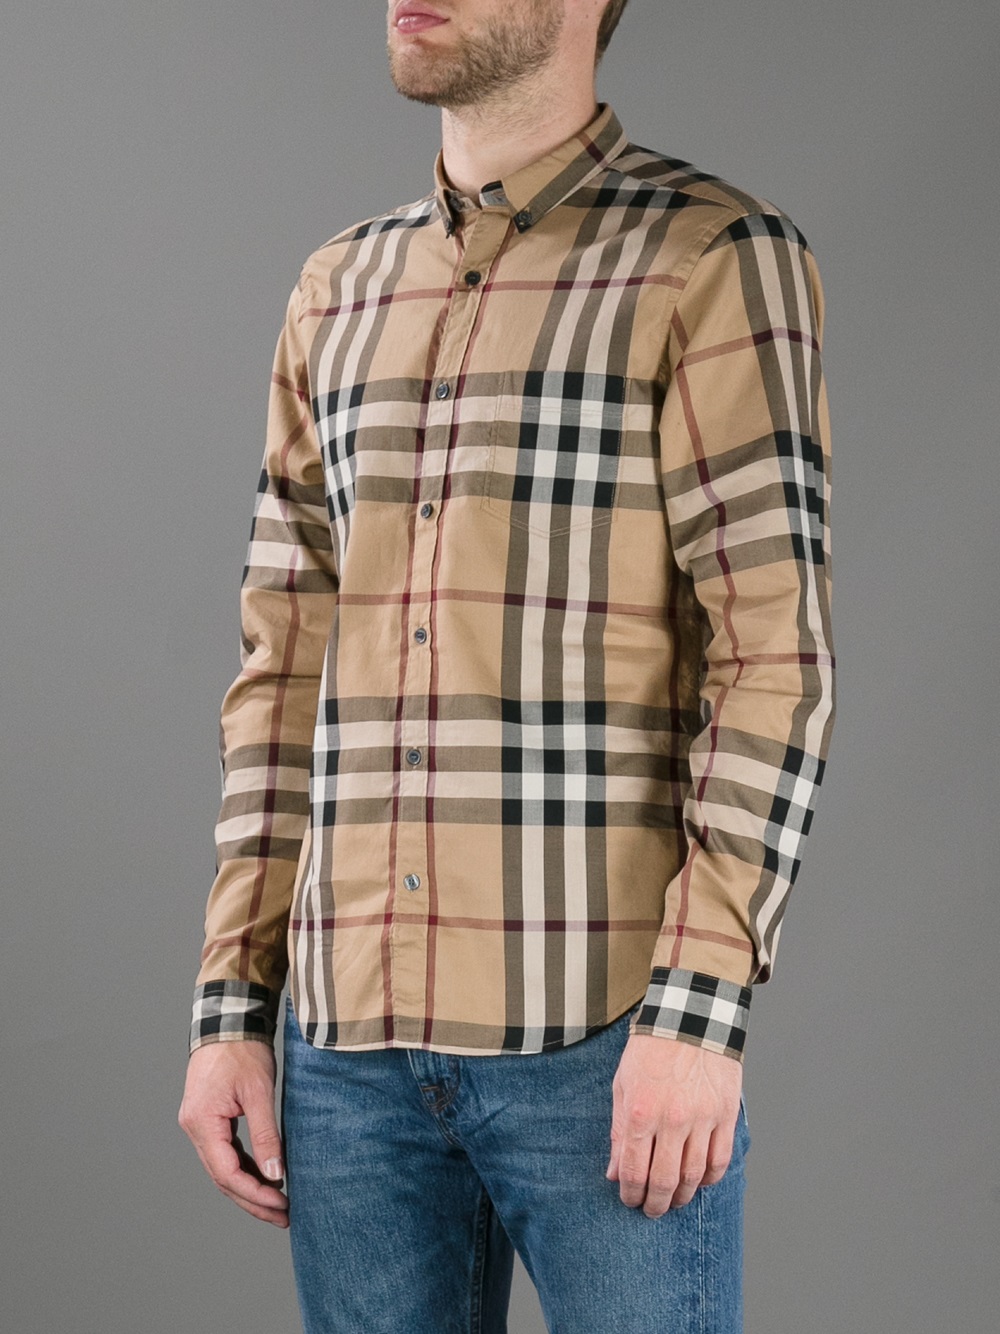 Burberry Brit Checked Shirt in Natural for Men - Lyst